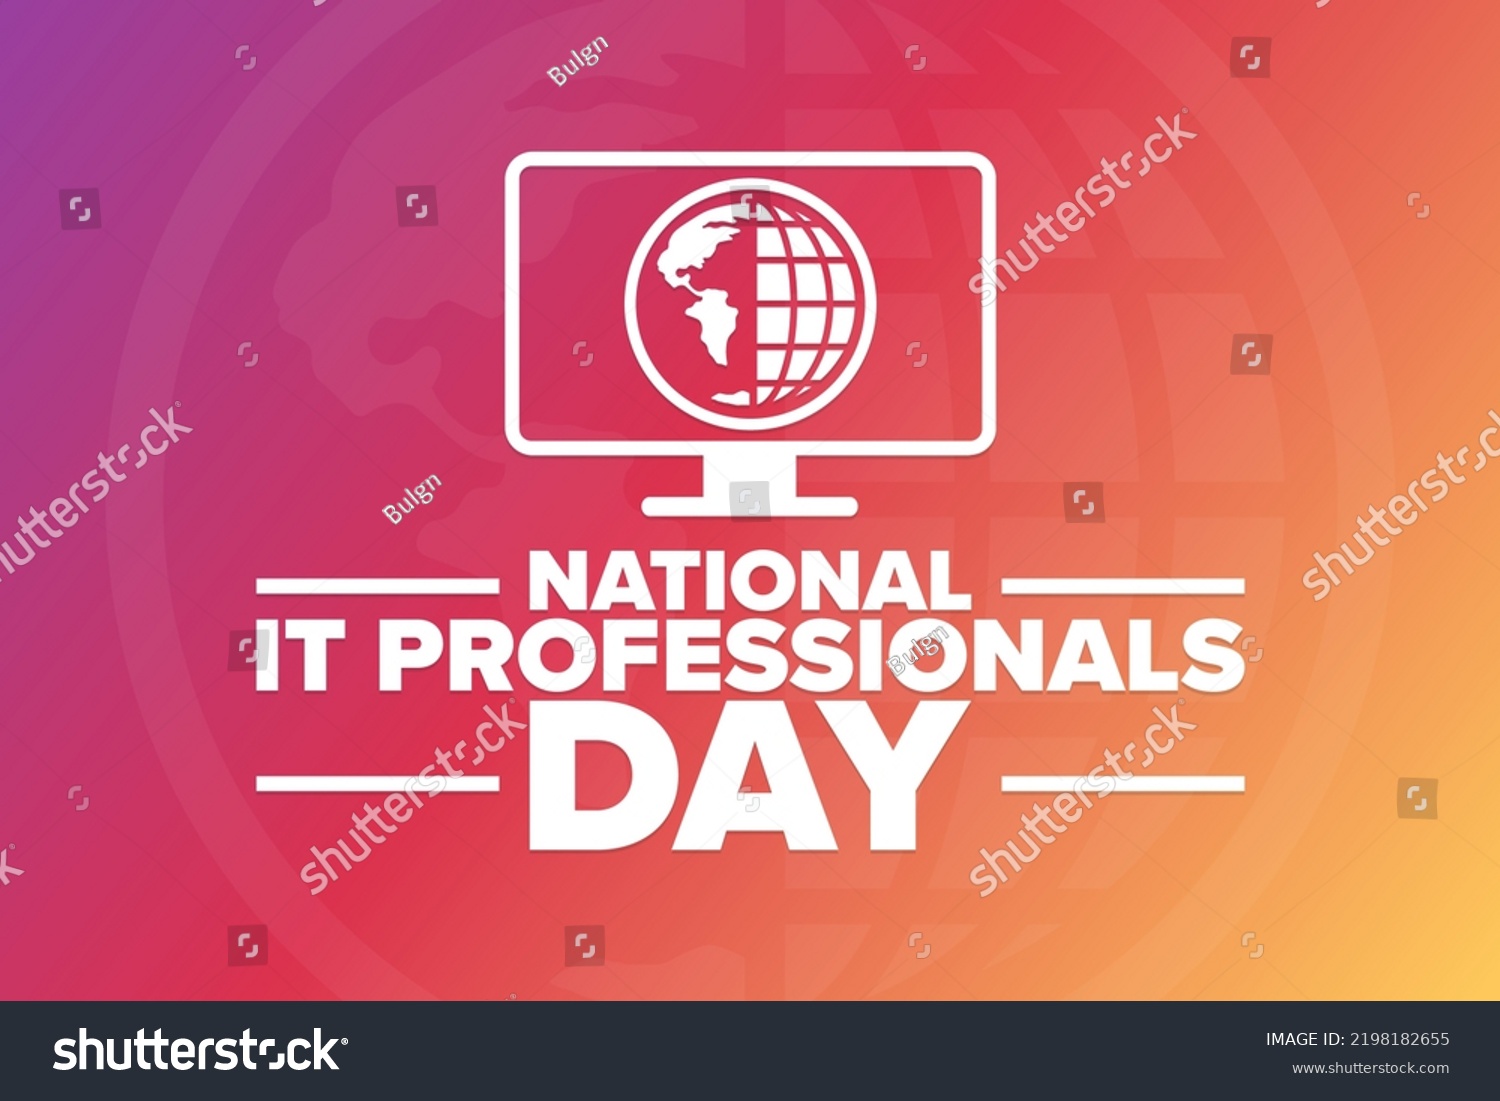 National Professionals Day Holiday Concept Template Stock Vector